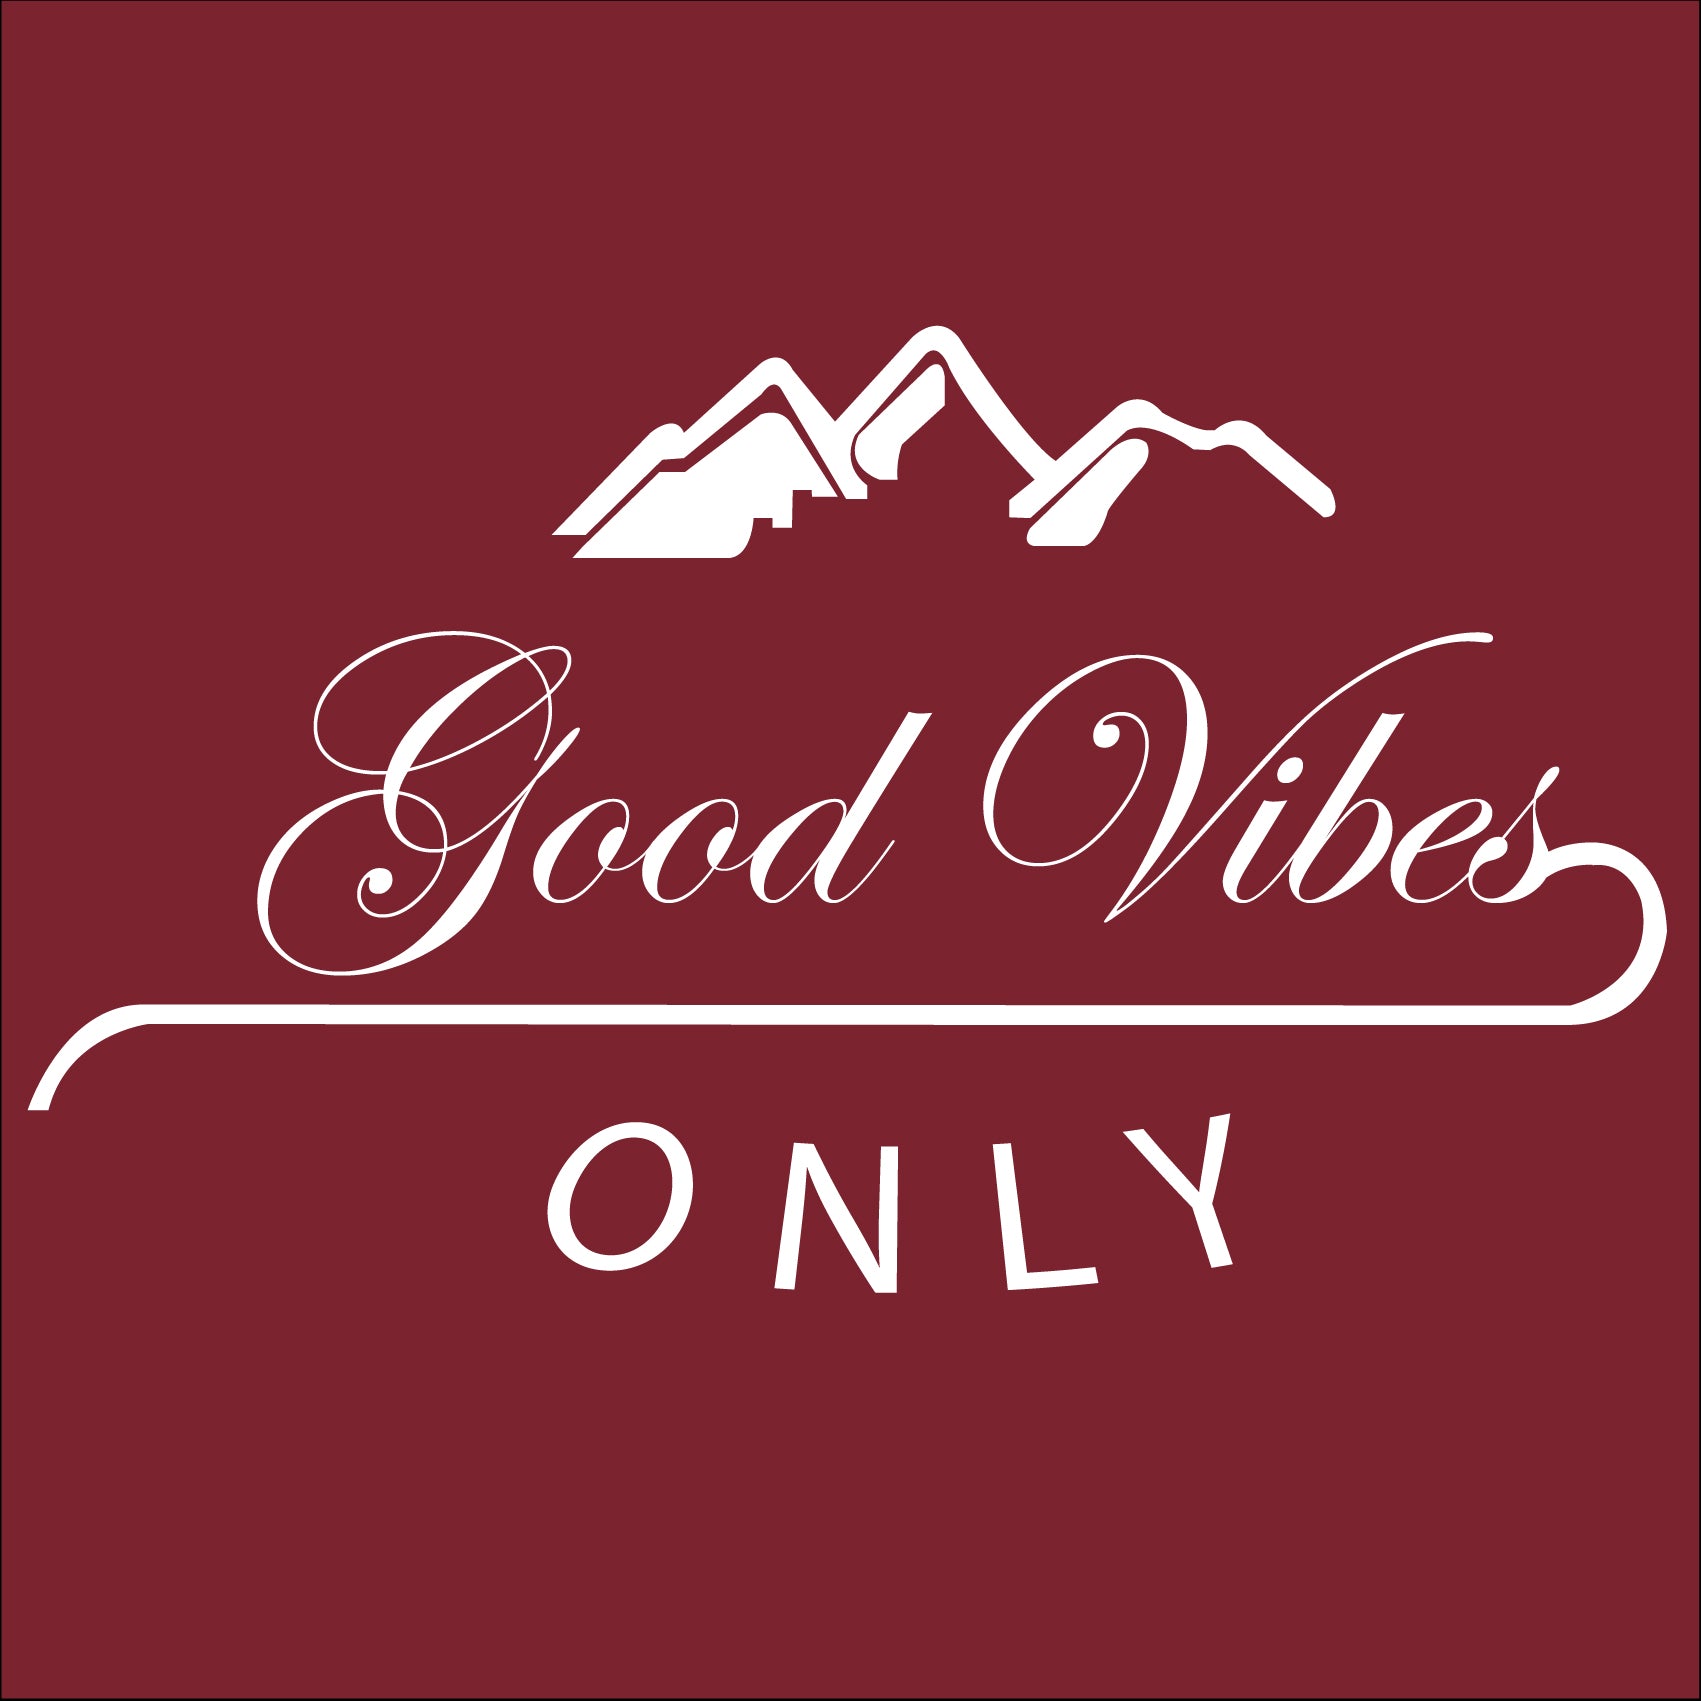 Good Vibes Only Reactr Tshirts For Men - Eyewearlabs